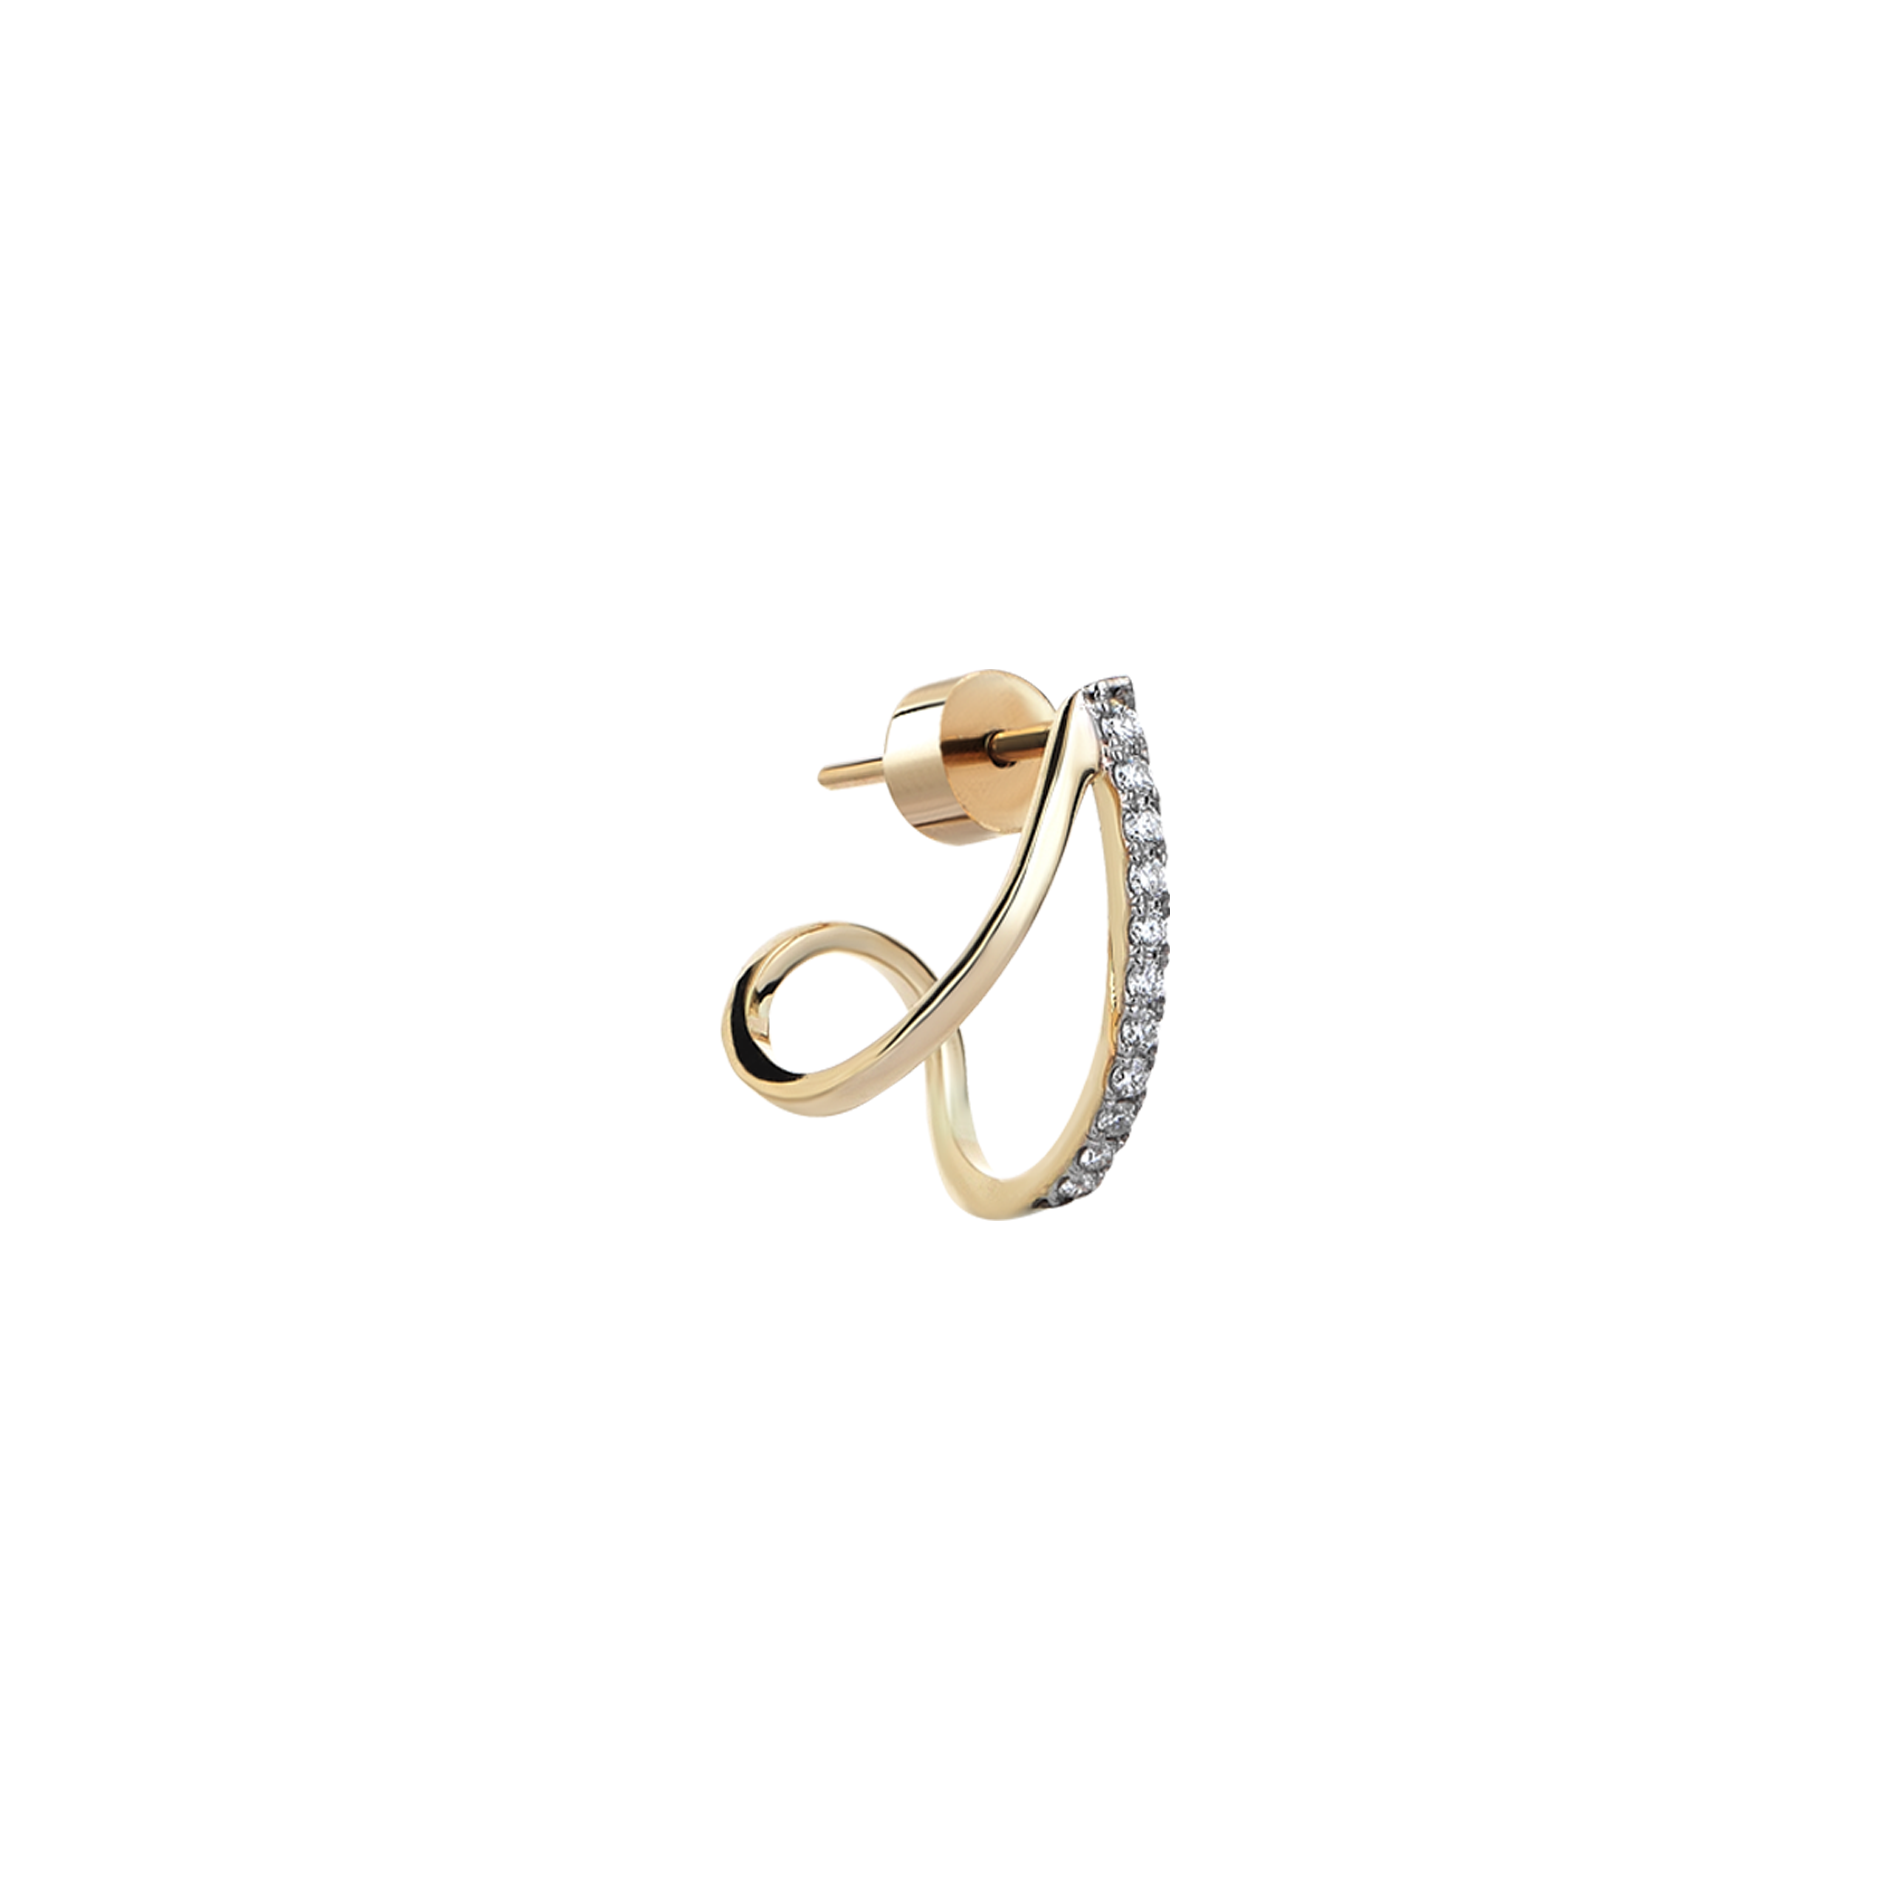 Double Hoop Diamond Earring in Yellow Gold - Her Story Shop